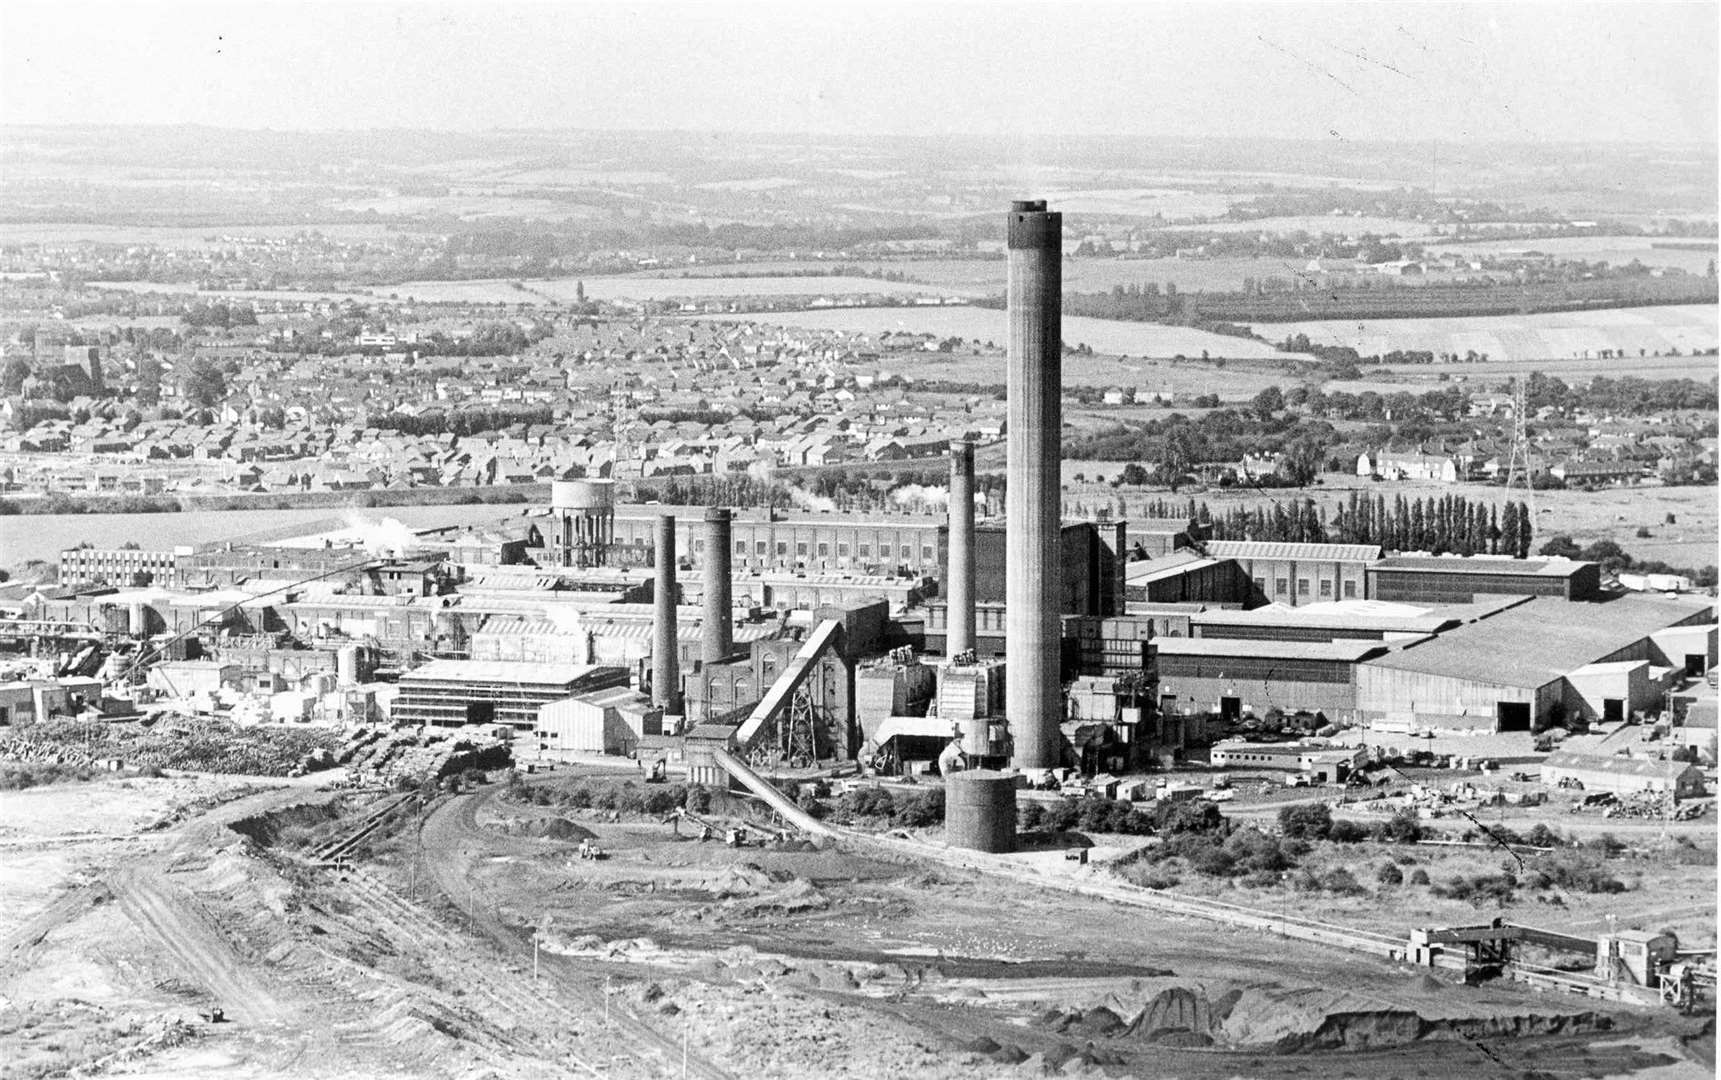 Kemsley Paper Mill photographed at the turn of the decade in January 1990